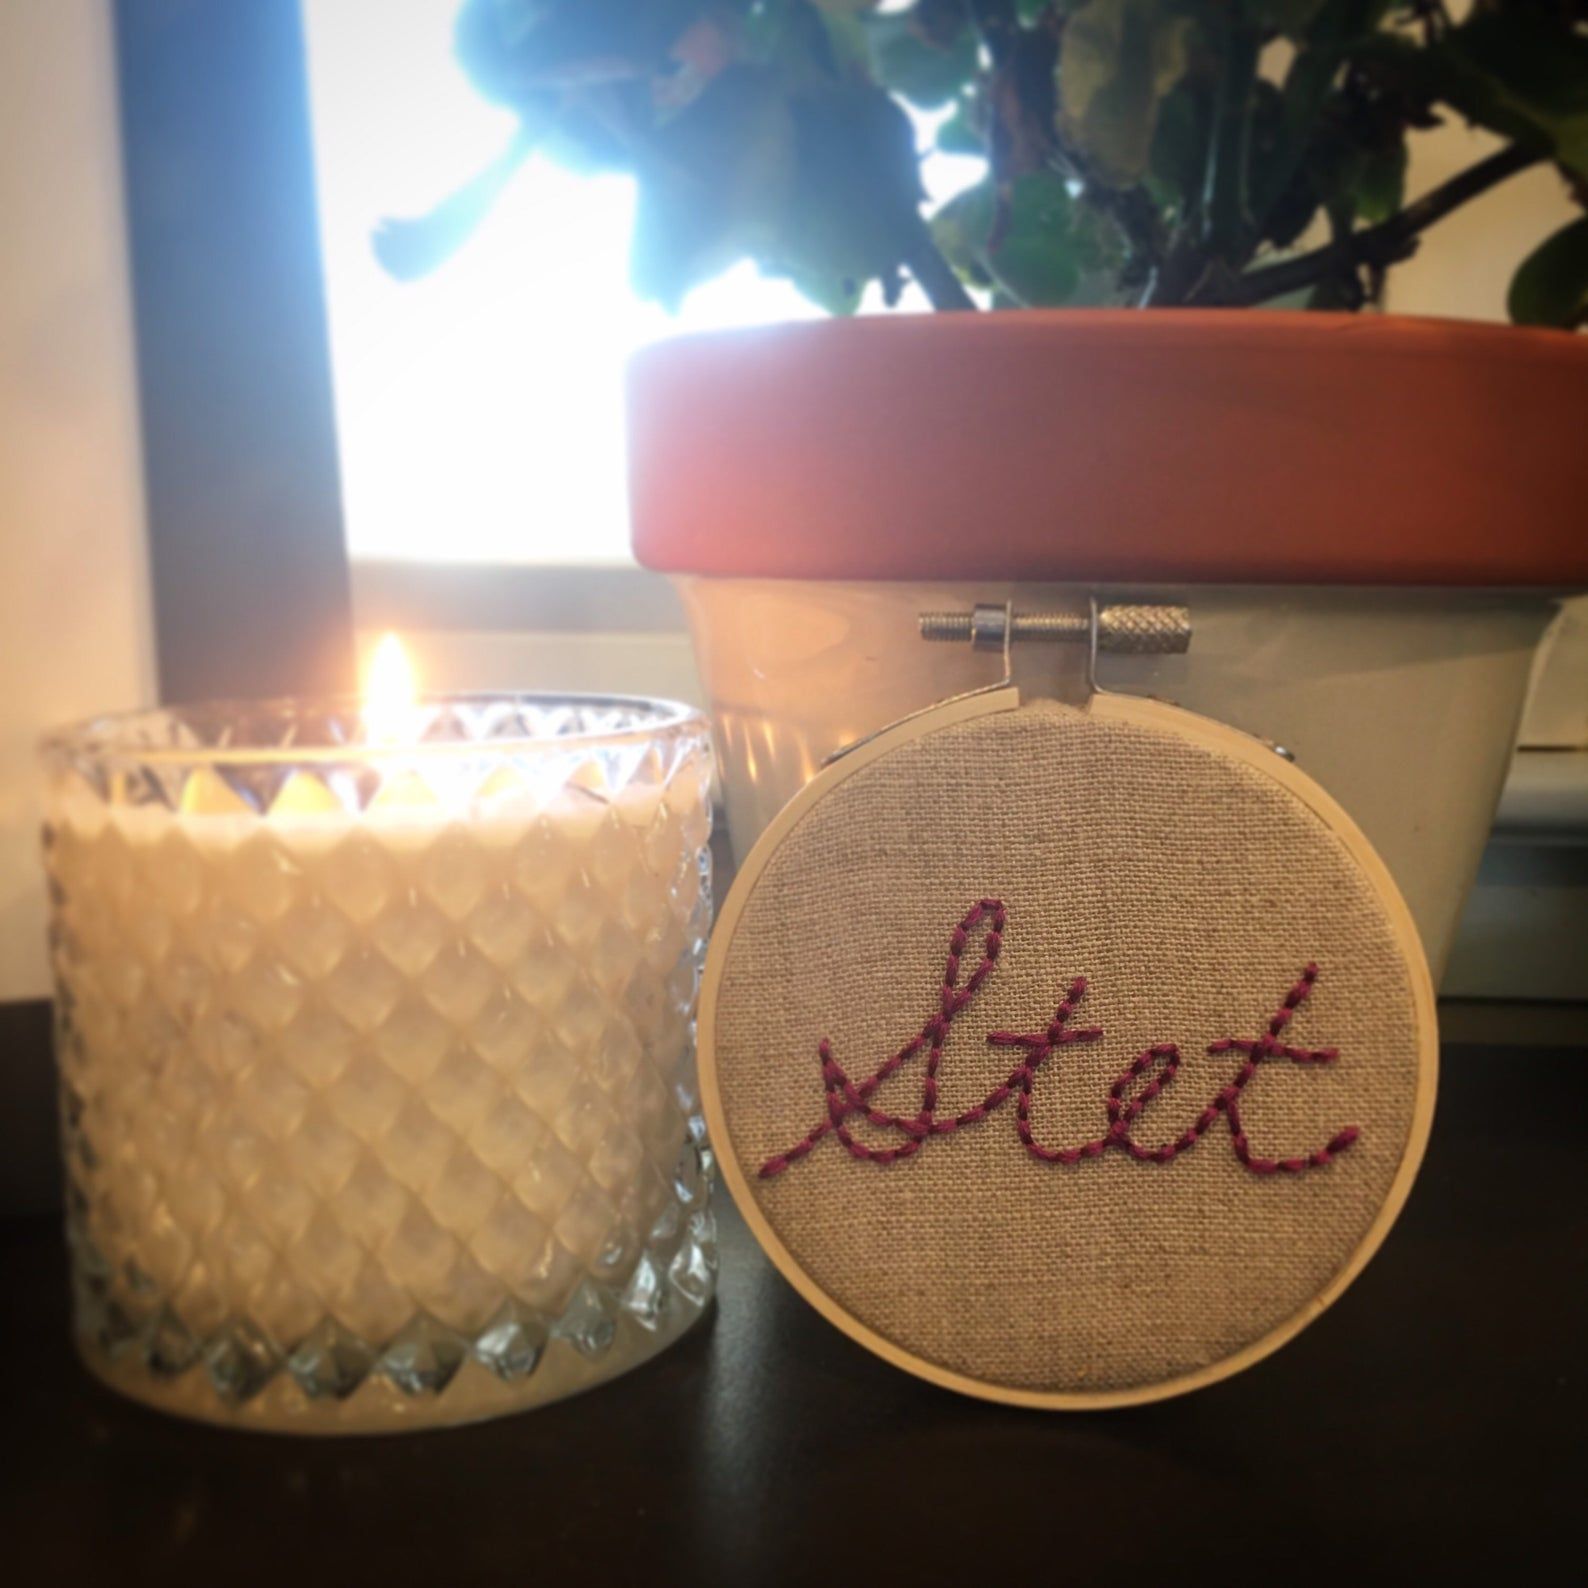 A small embroidery of the abbreviation "Stet" in cursive. The embroidery hoop is resting against a plant pot and is beside a burning candle.